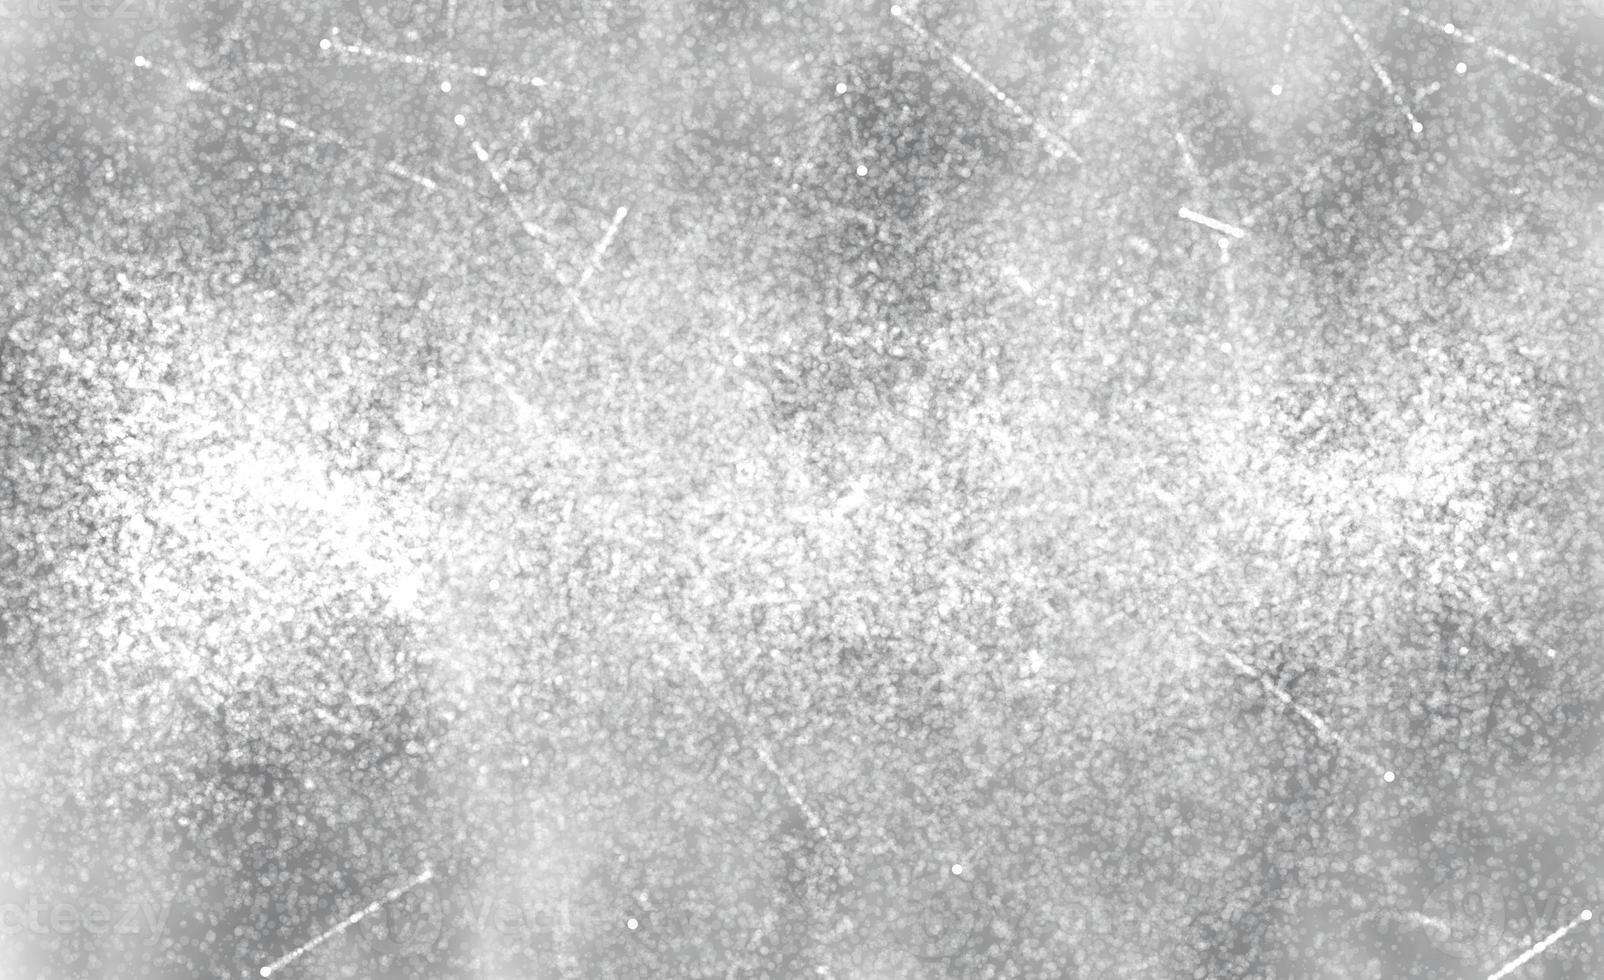 Scratch Grunge Urban Background.Grunge Black and White Distress Texture.Grunge rough dirty background.For posters, banners, retro and urban designs photo